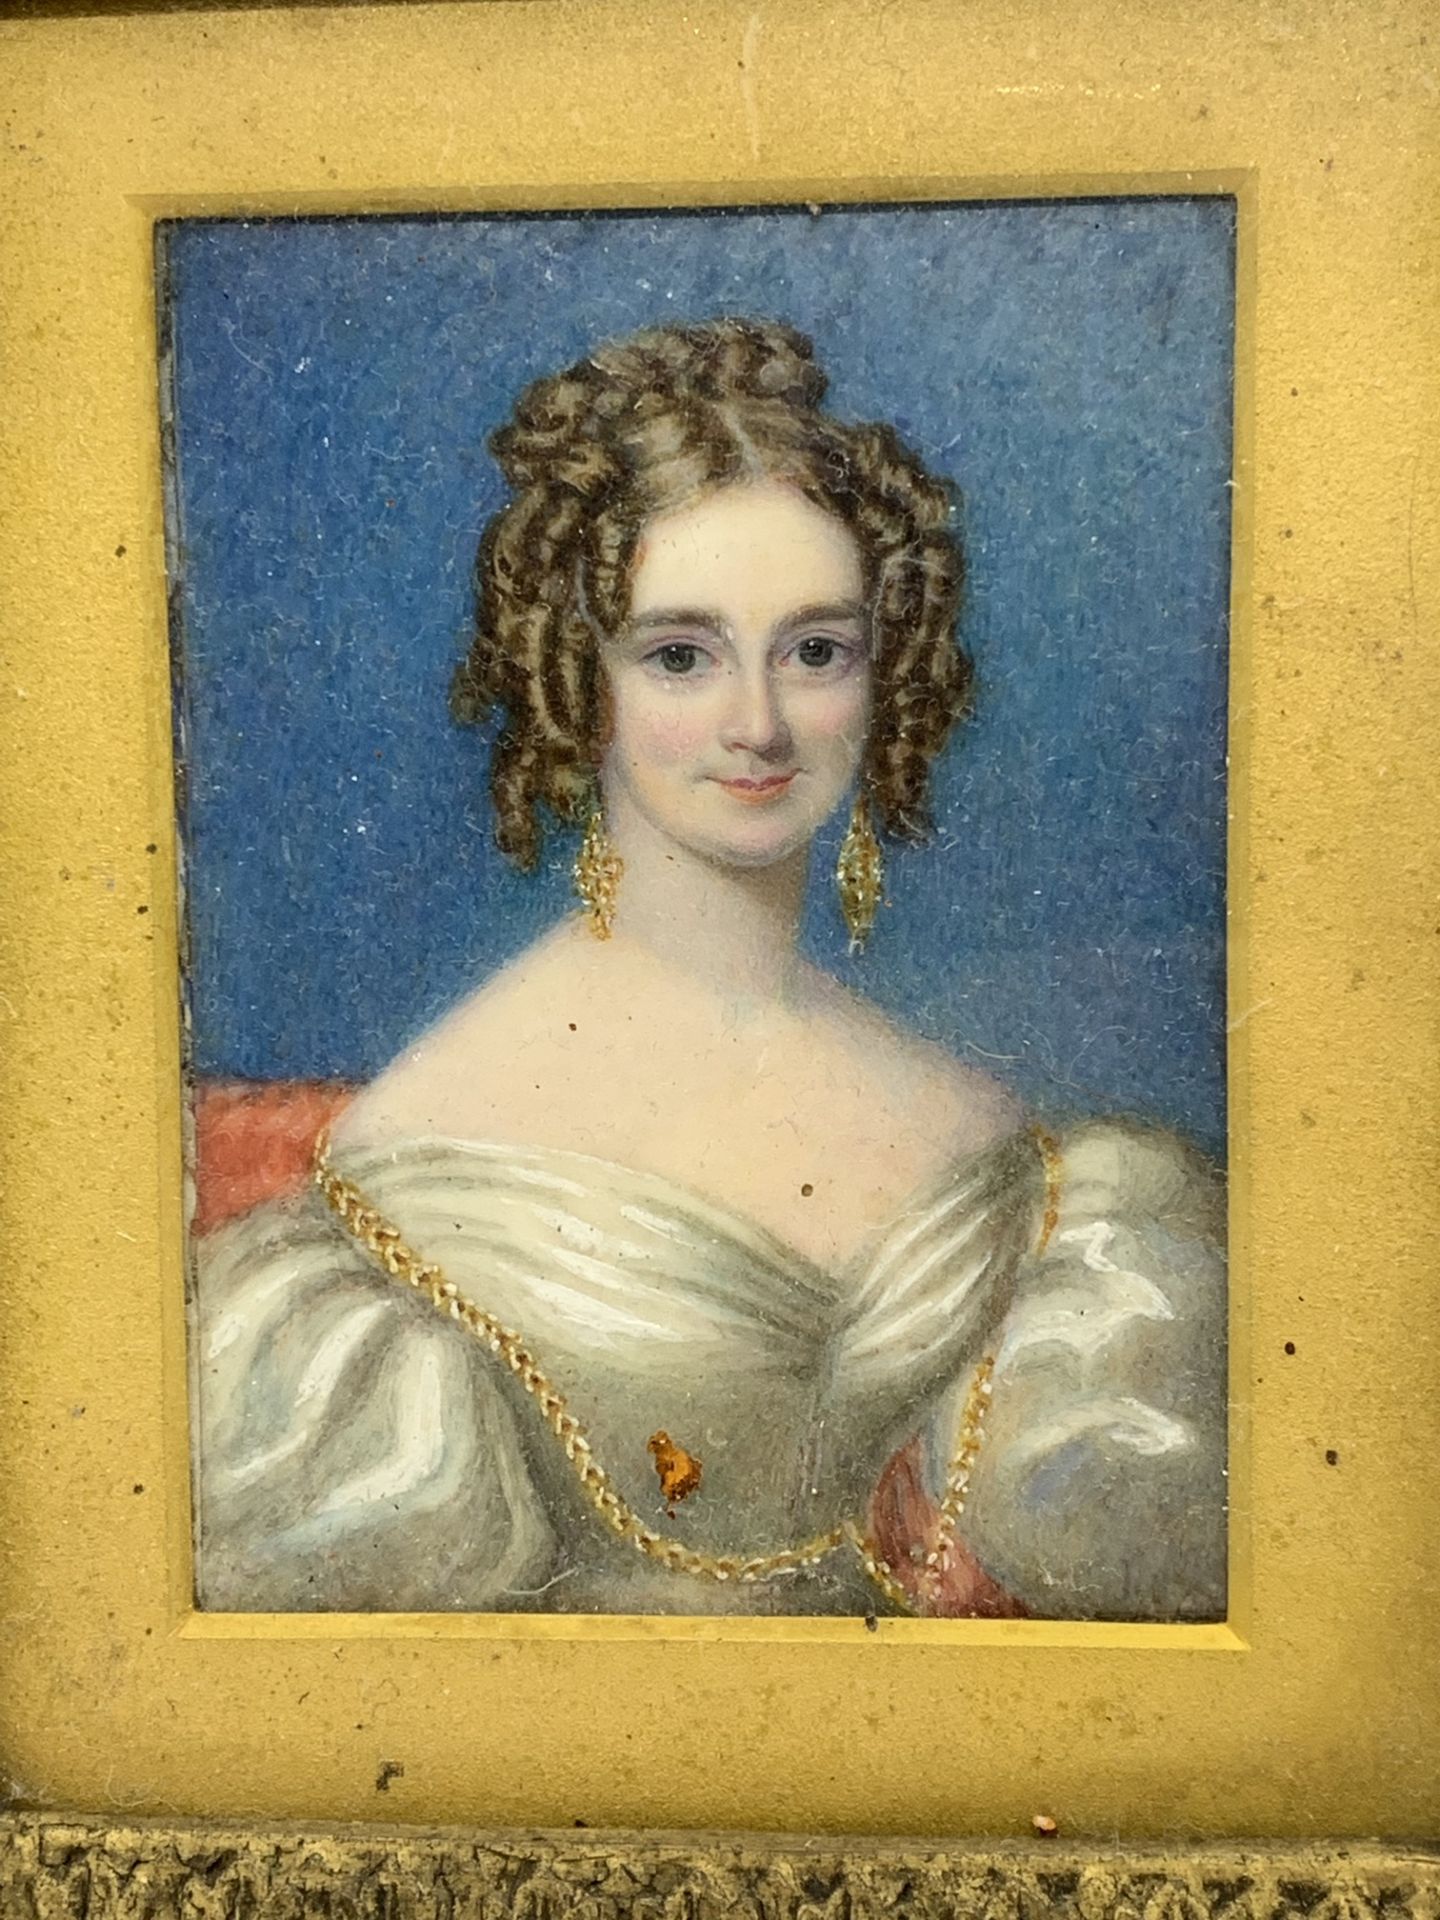 FRAMED MINIATURE PAINTING OF A LADY FROM PRIVATE COLLECTION